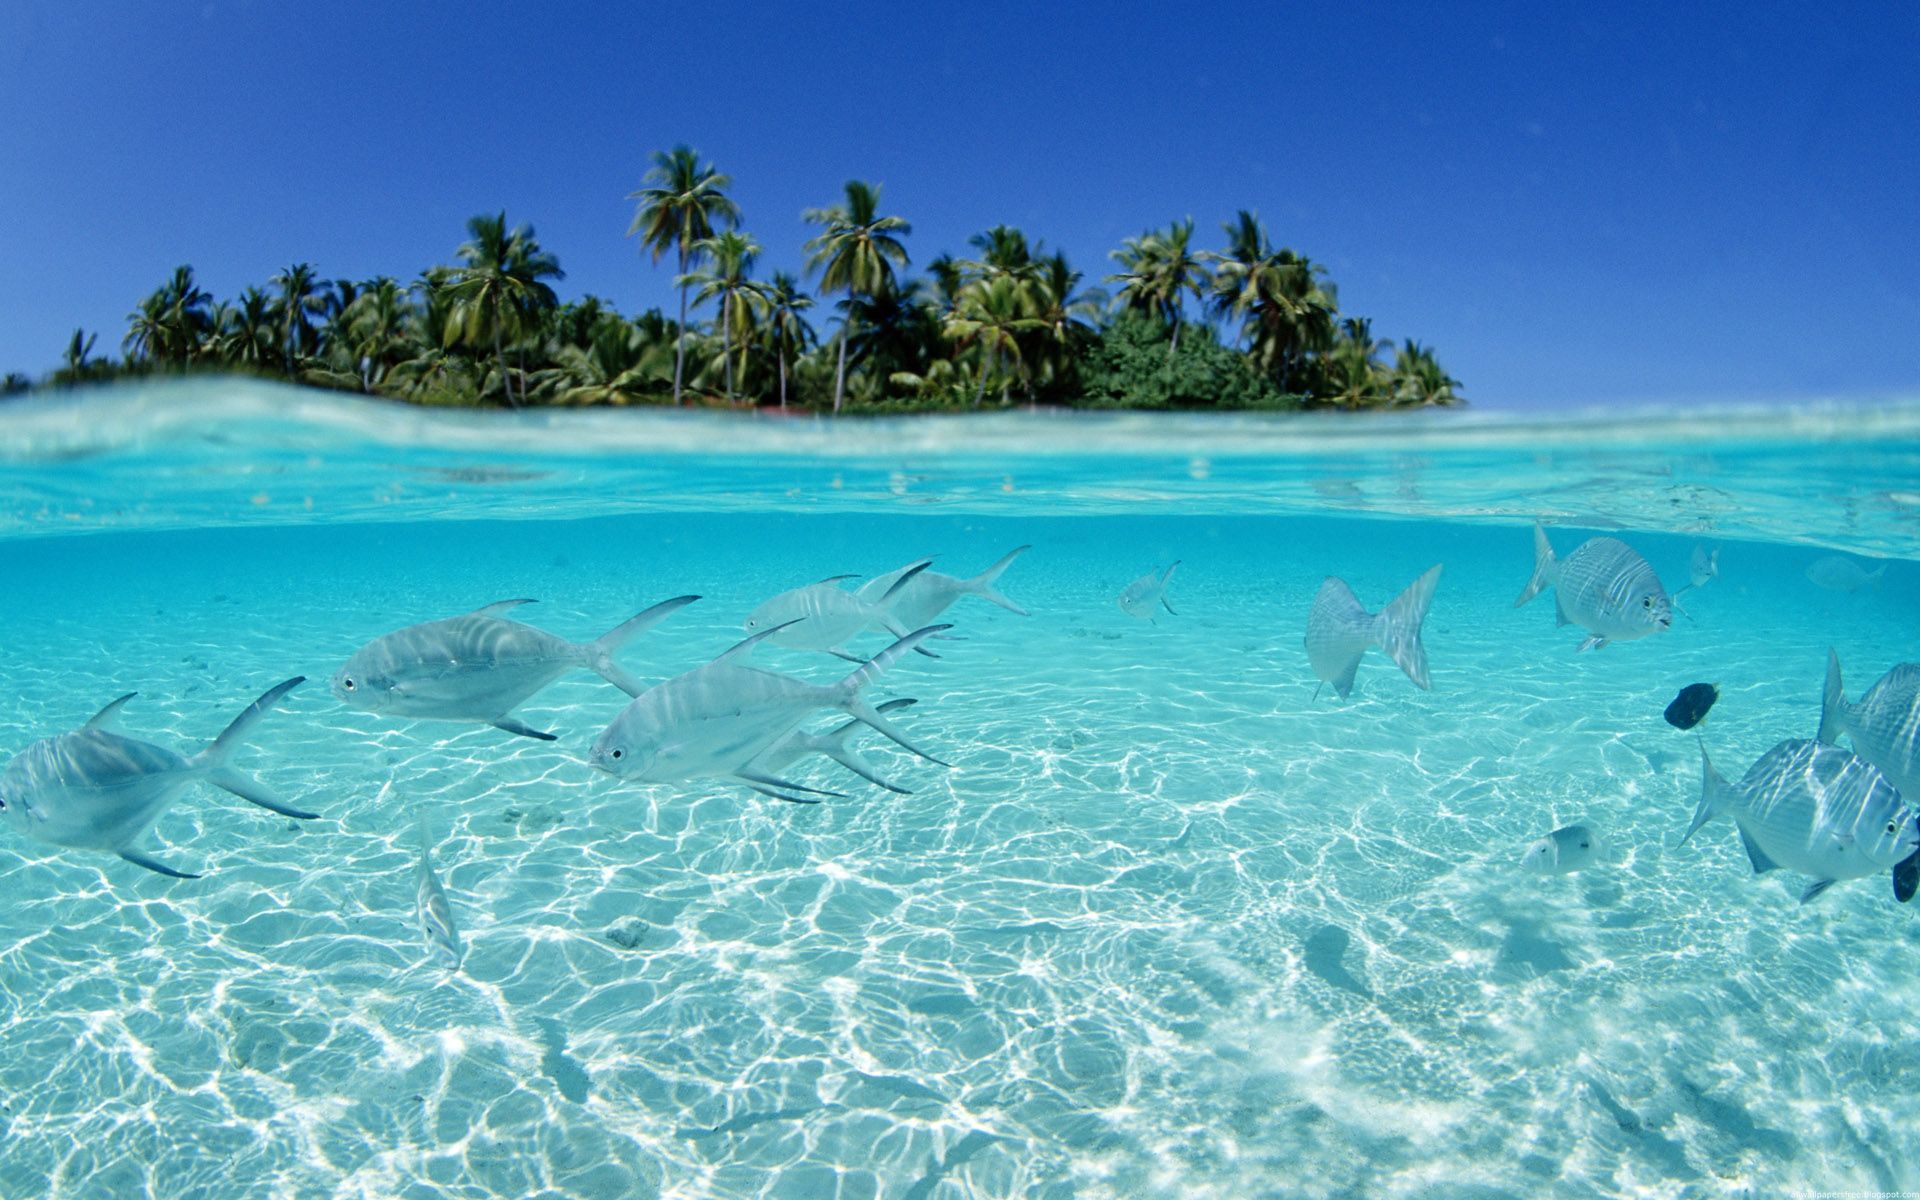 Tropical Island And Tropical Fish Wallpaper | 1920x1200 | ID:23479